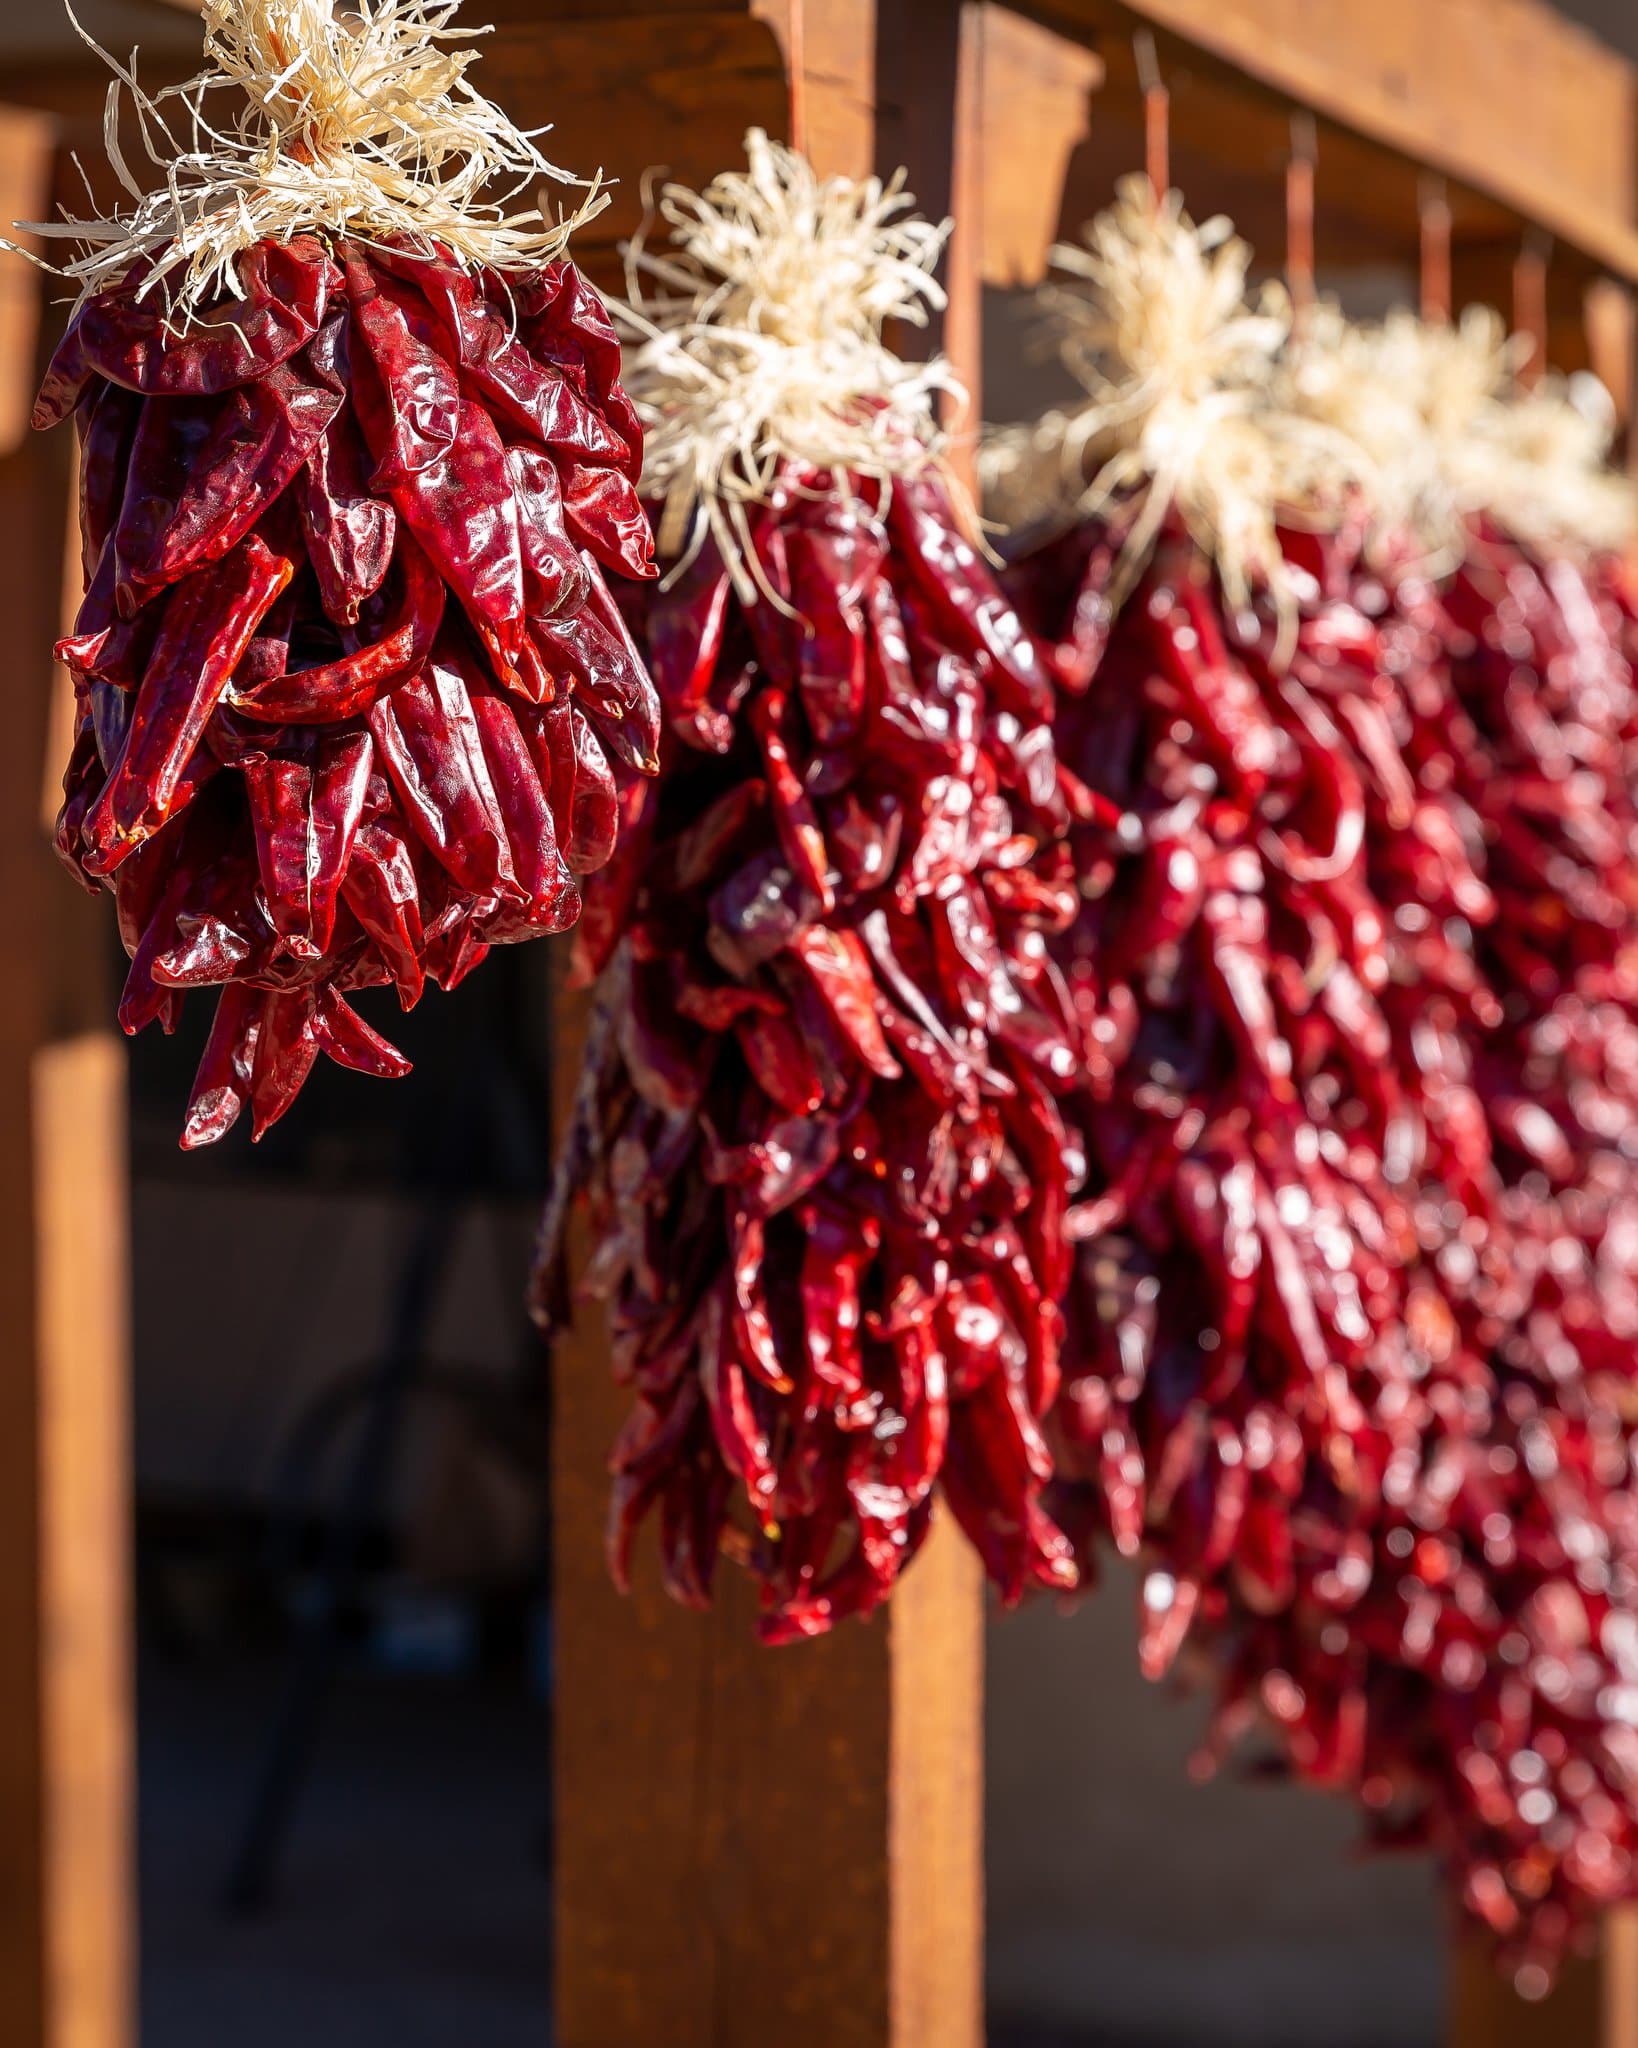 Bundles of bright red Traditional Sandia Ristras hanging to dry, tied with straw and suspended from a wooden structure in a sunny outdoor setting.